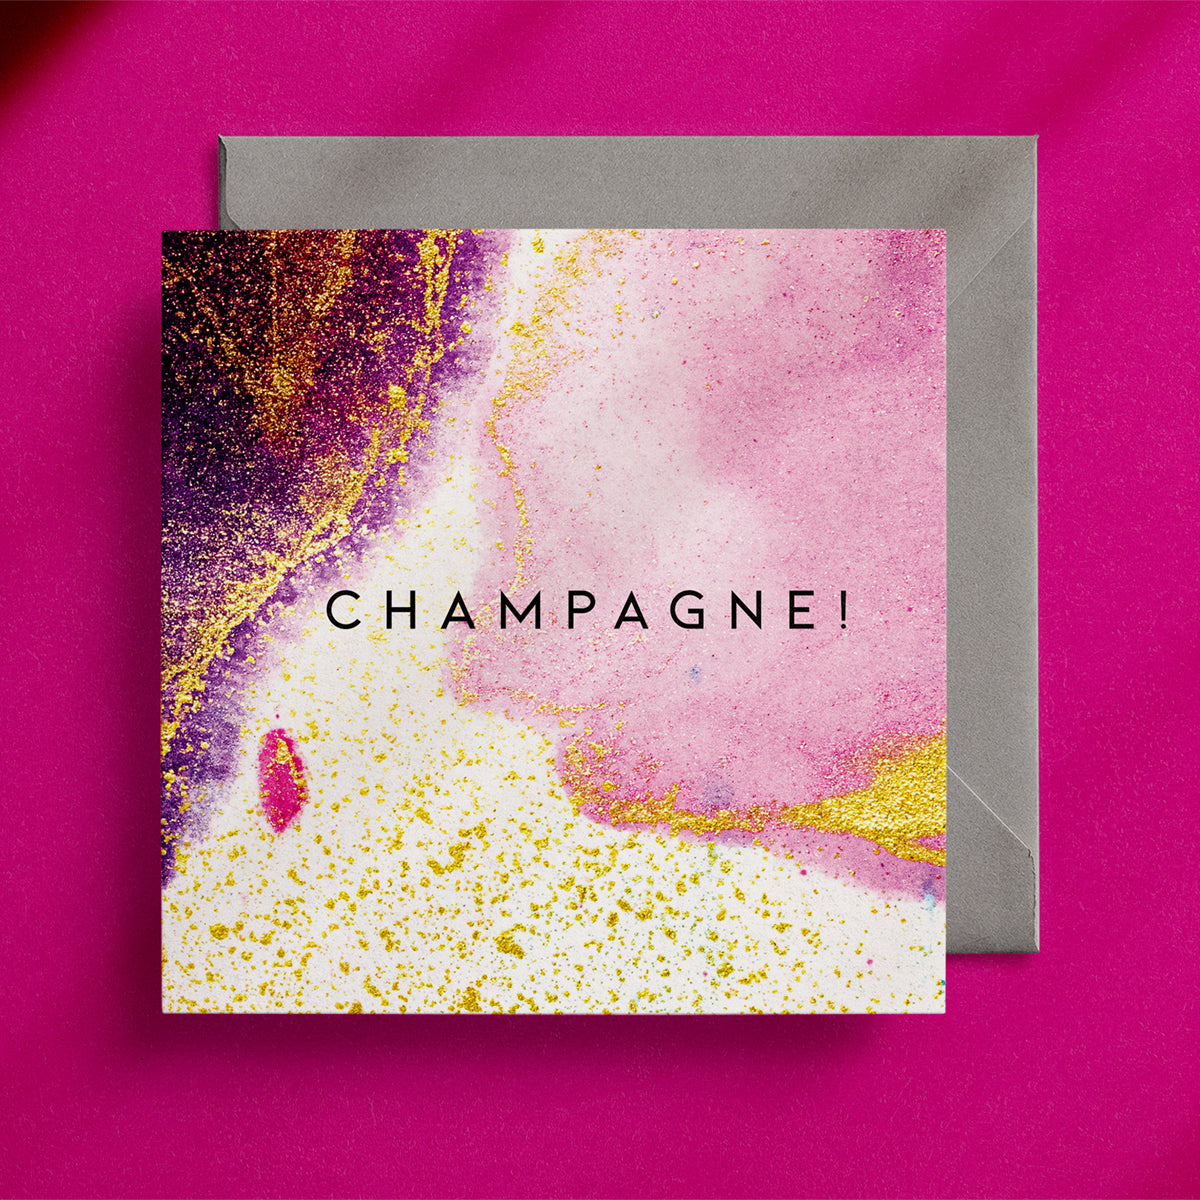 Gold spattered, pink and purple abstract design on a square greeting card with the word "Champagne!" in the centre